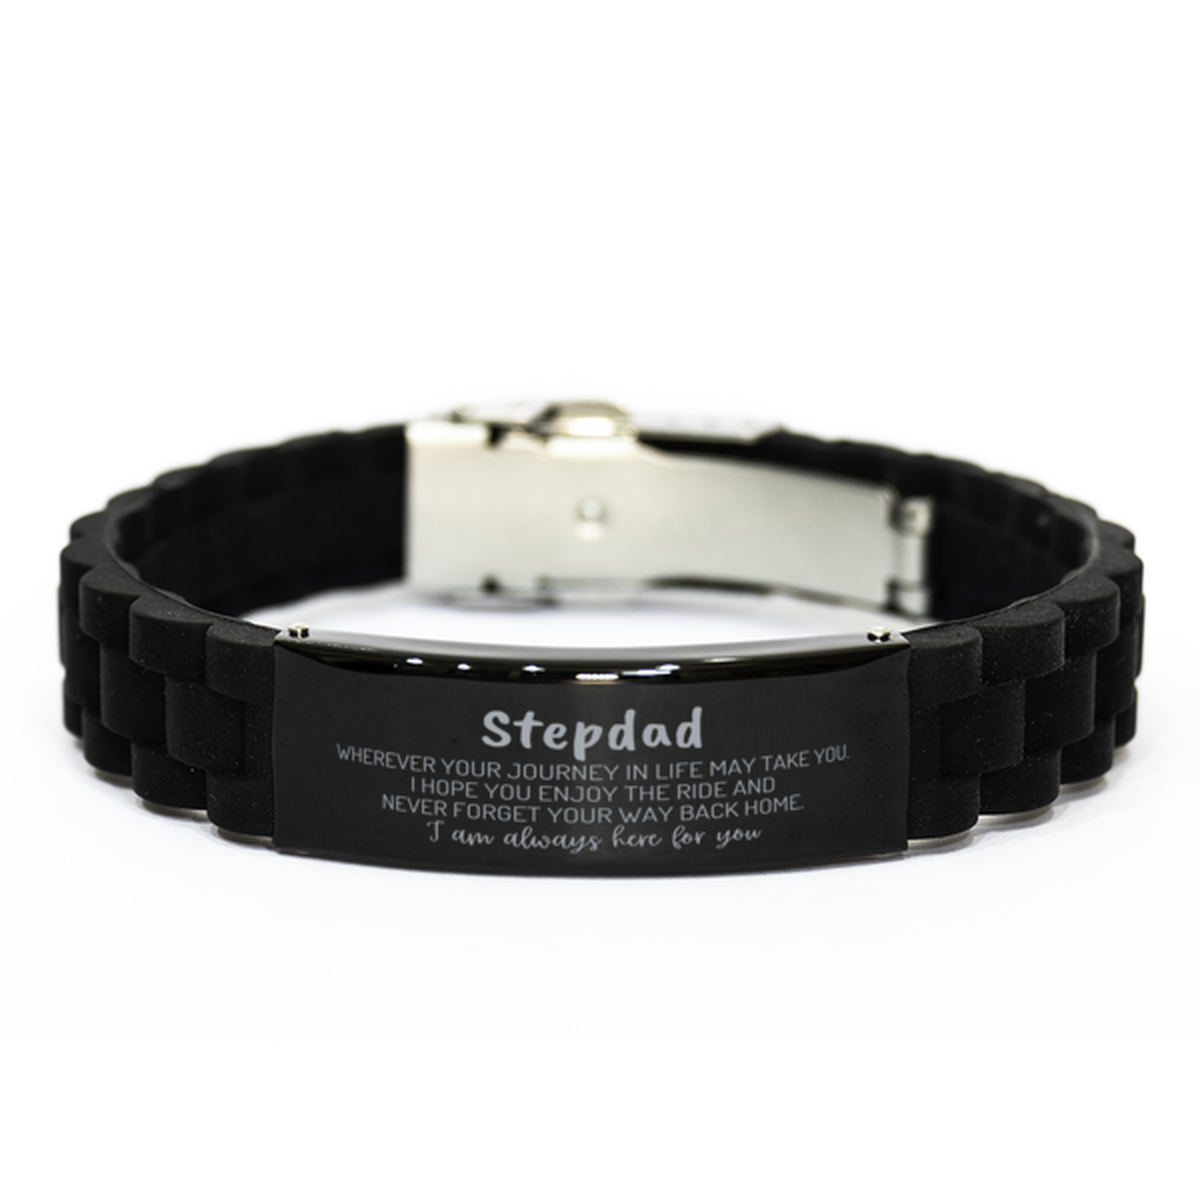 Stepdad wherever your journey in life may take you, I am always here for you Stepdad Black Glidelock Clasp Bracelet, Awesome Christmas Gifts For Stepdad, Stepdad Birthday Gifts for Men Women Family Loved One